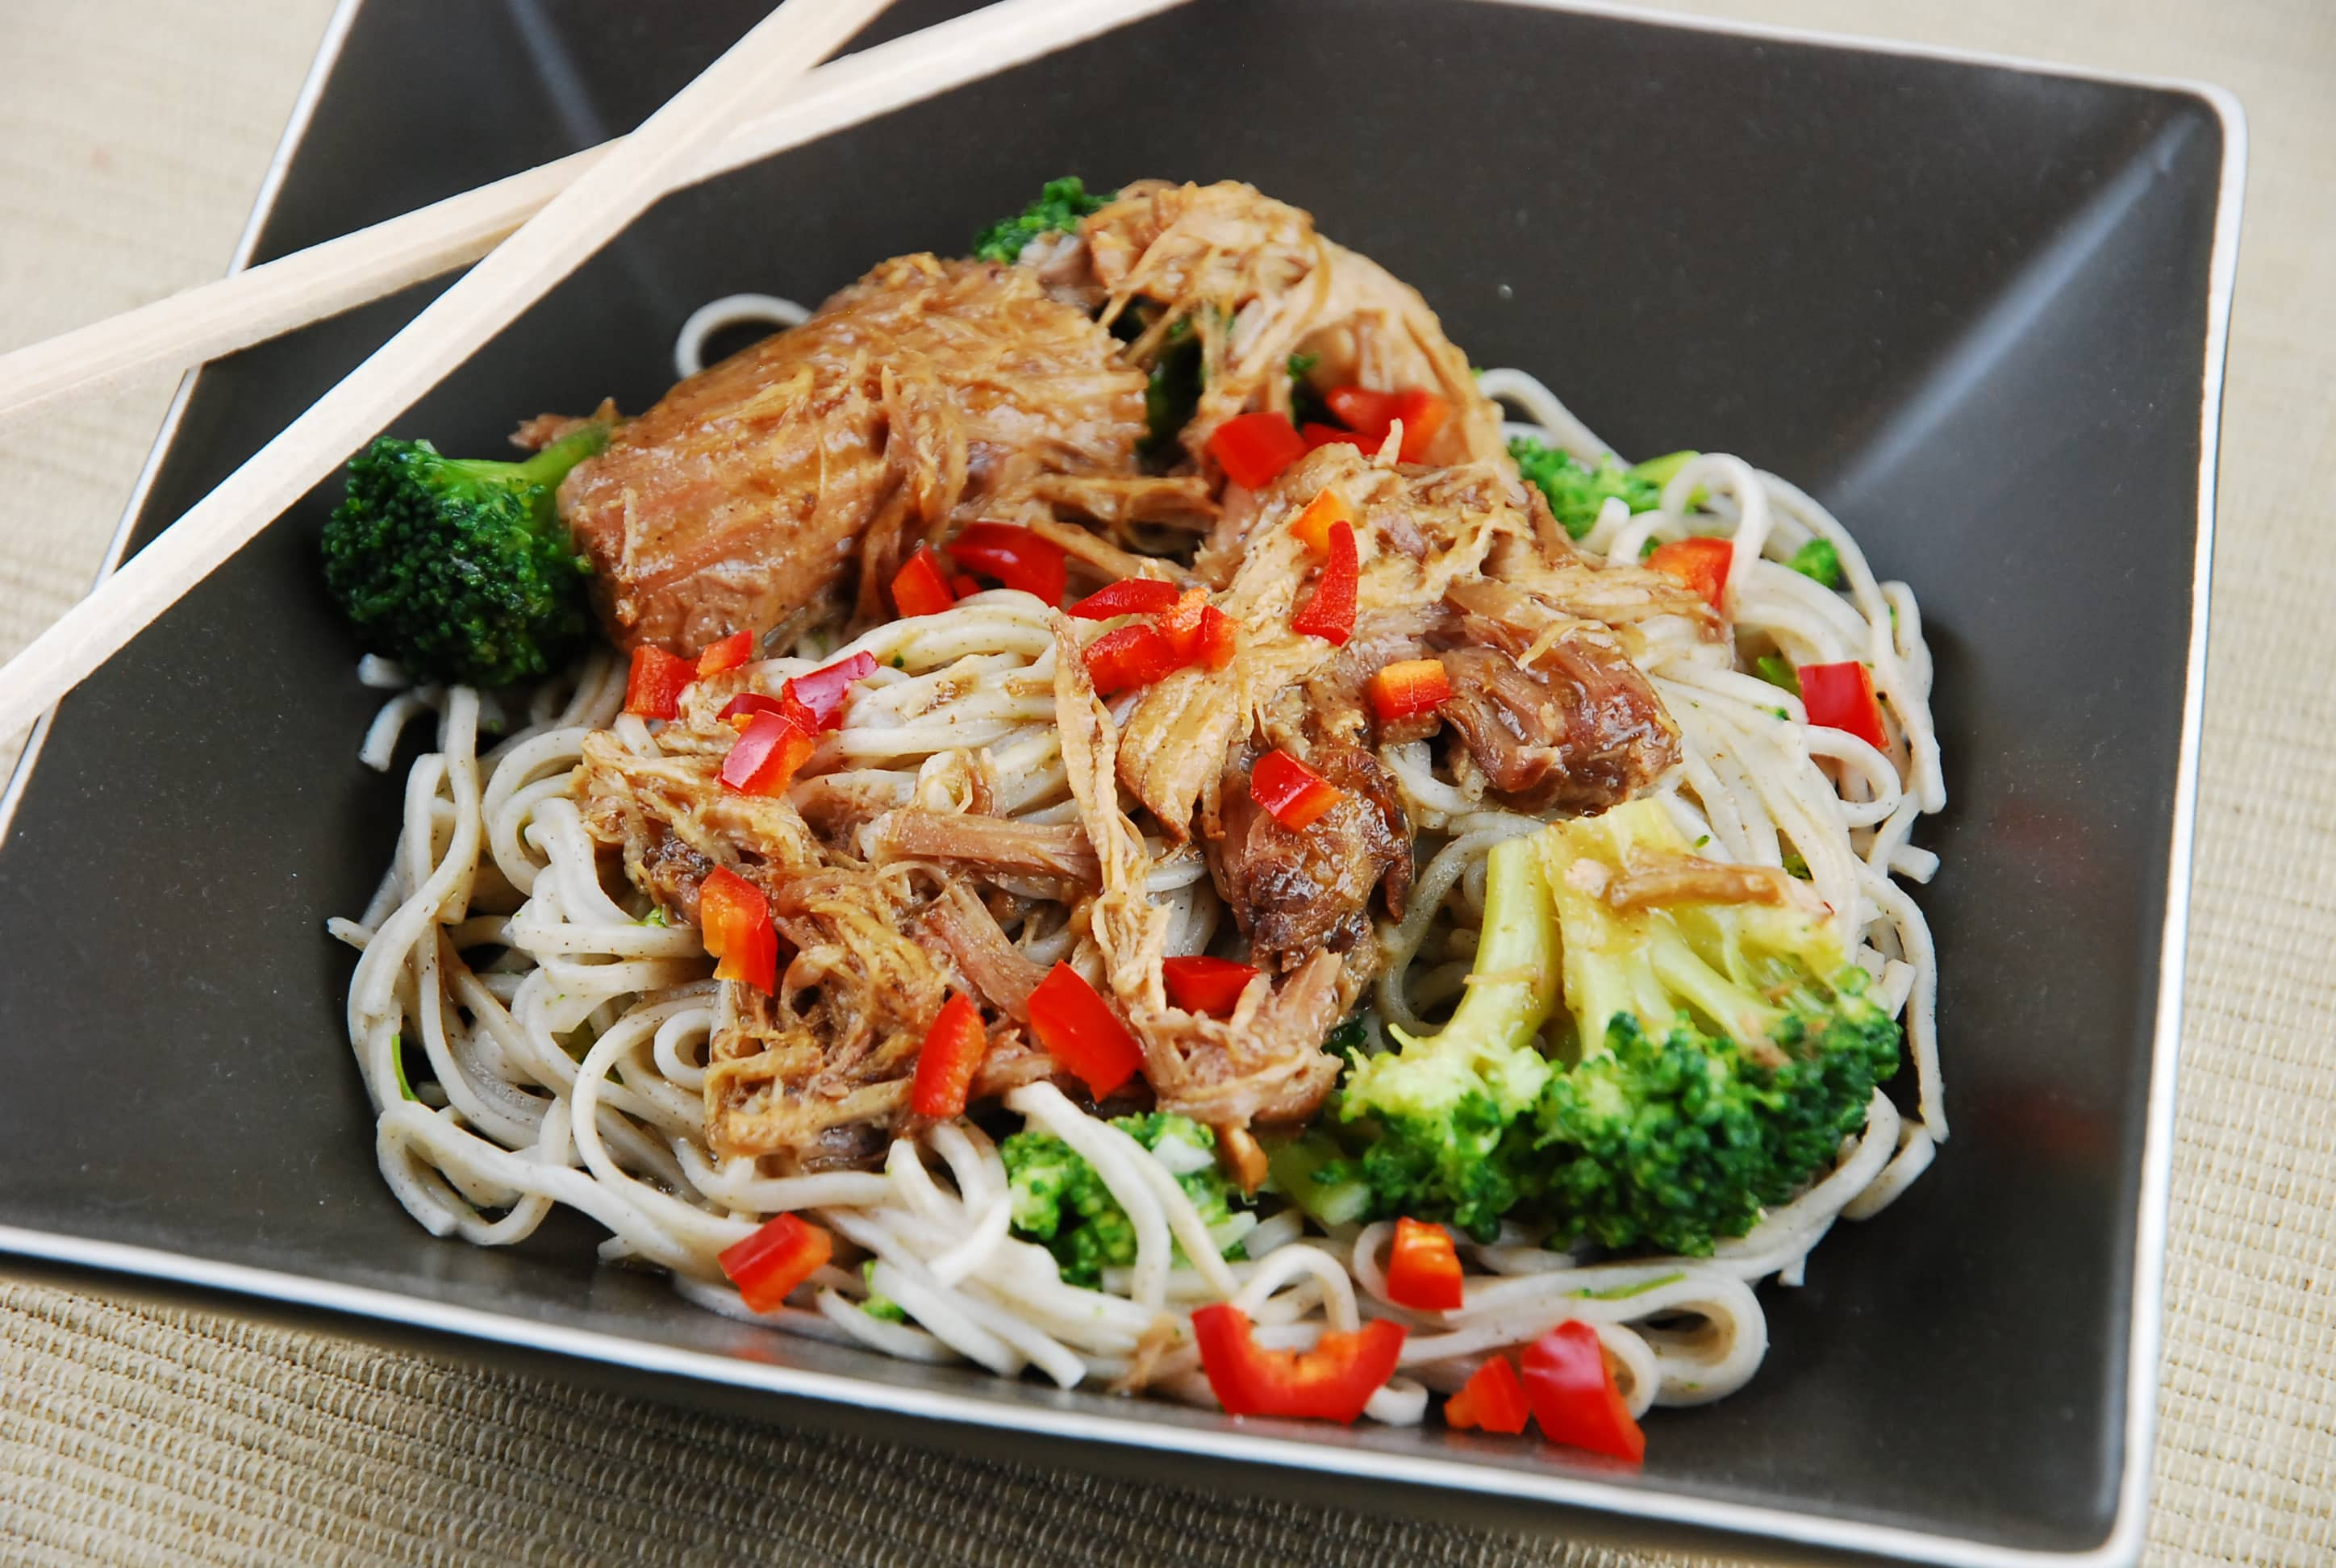 Slow Cooker Chicken And Noodles
 Slow Cooker Asian Chicken and Noodles with Broccoli 7